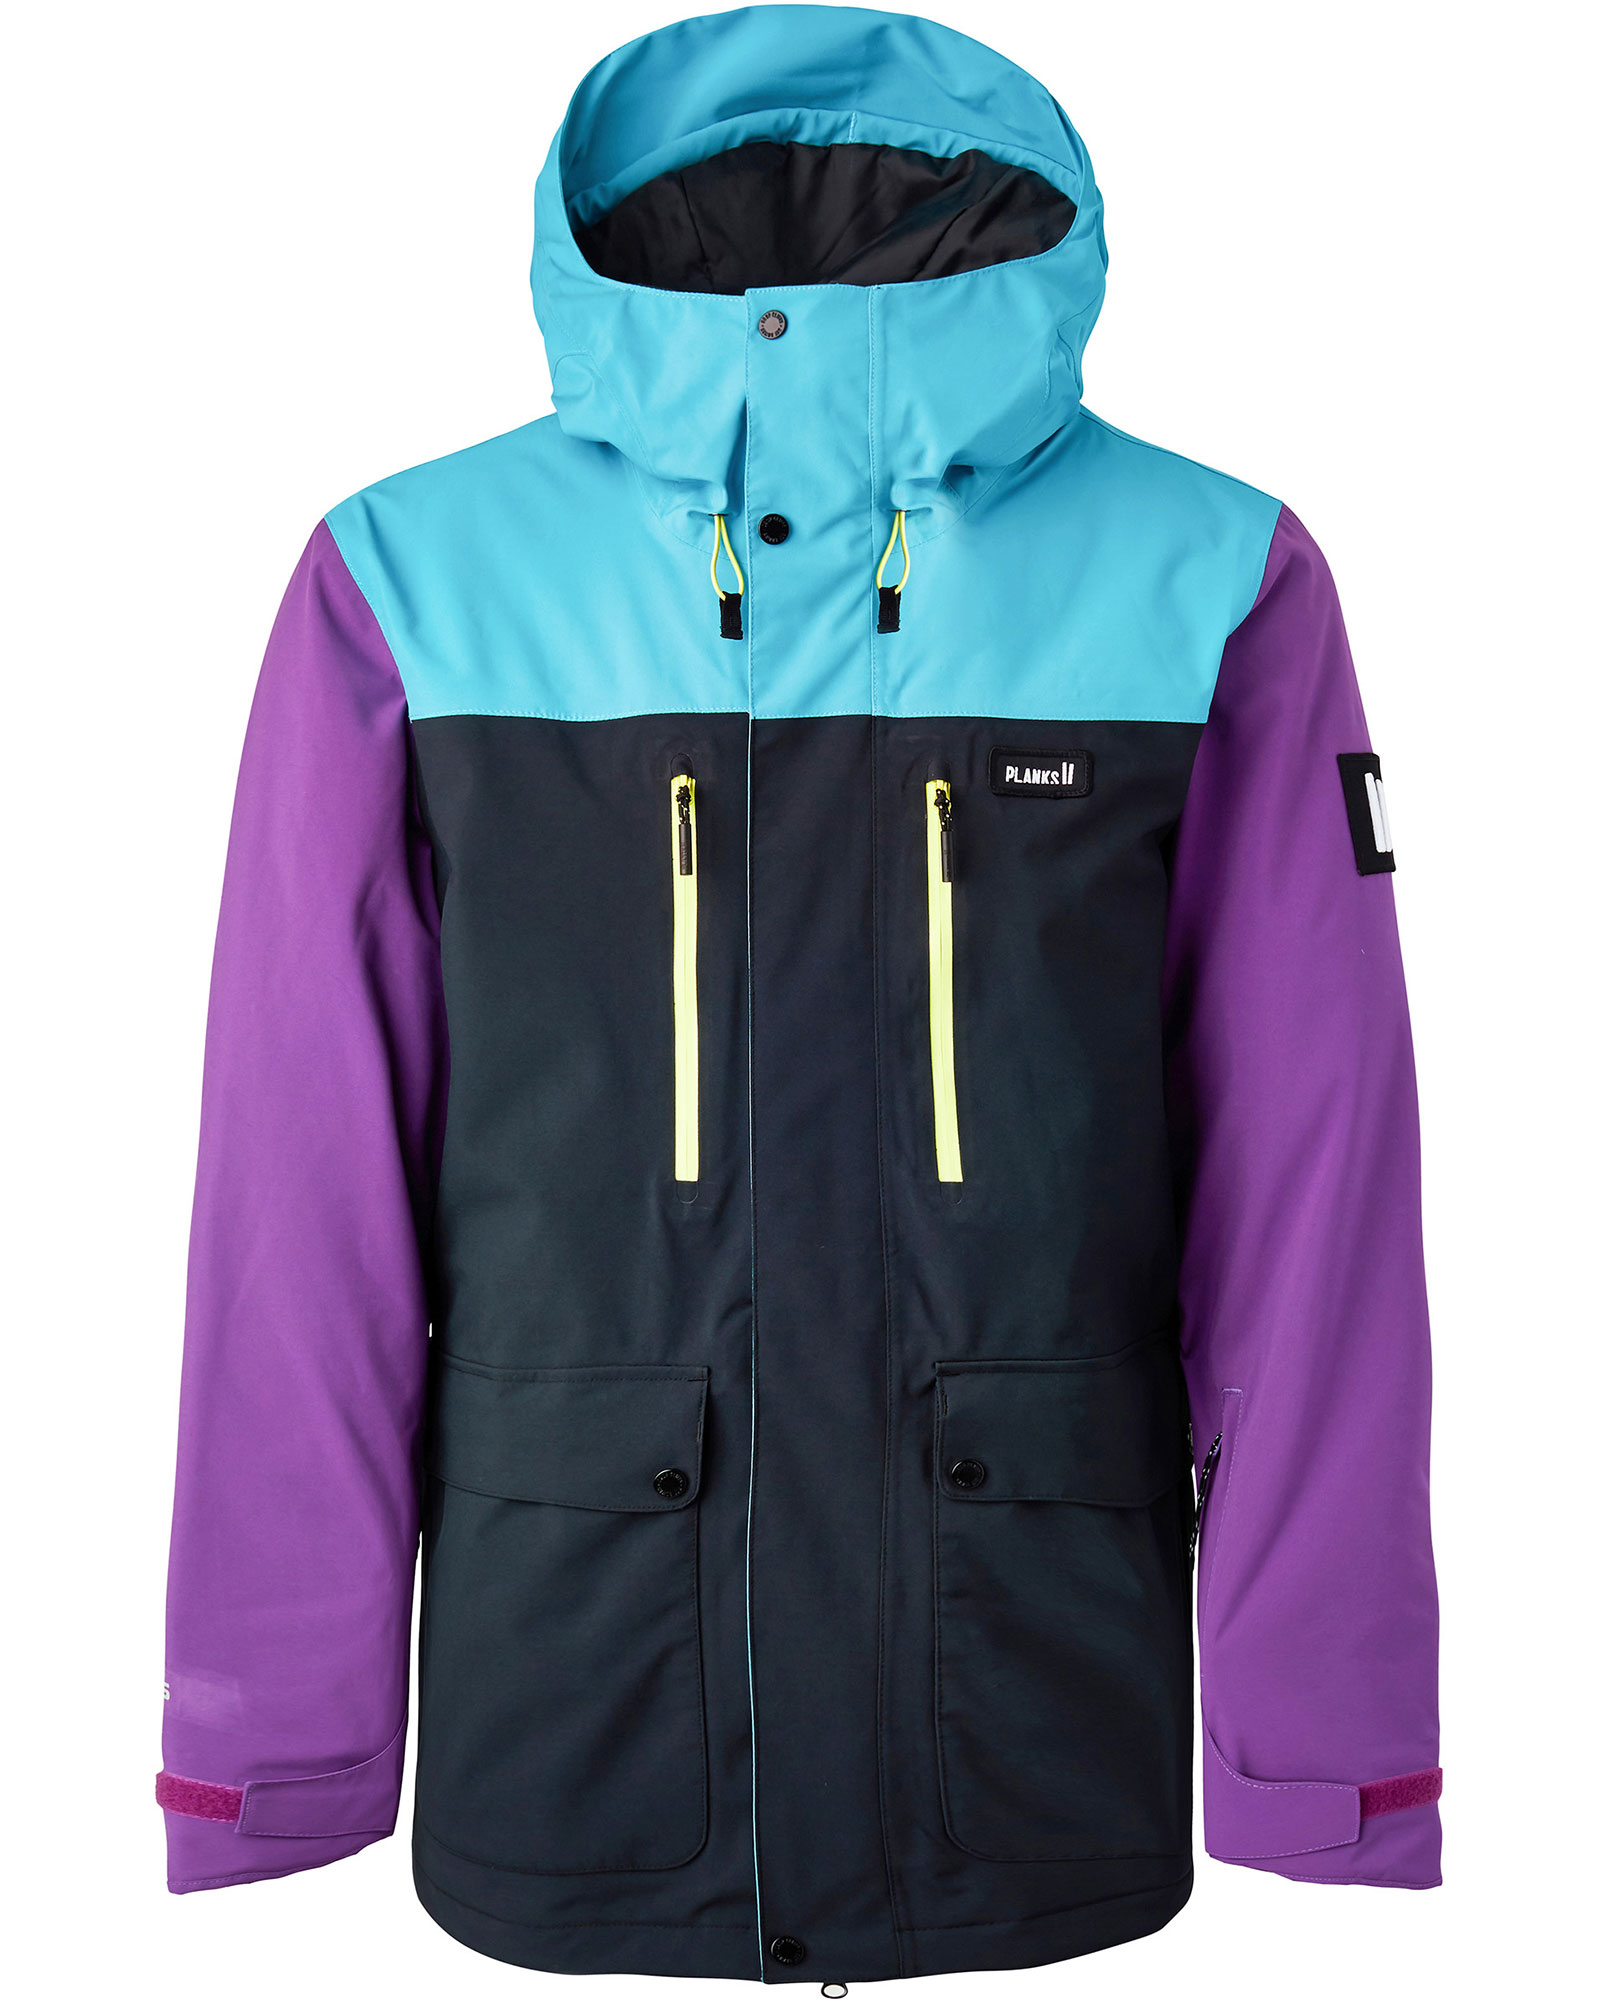 Planks Good Times Men’s Insulated Jacket - Petrol Blue S